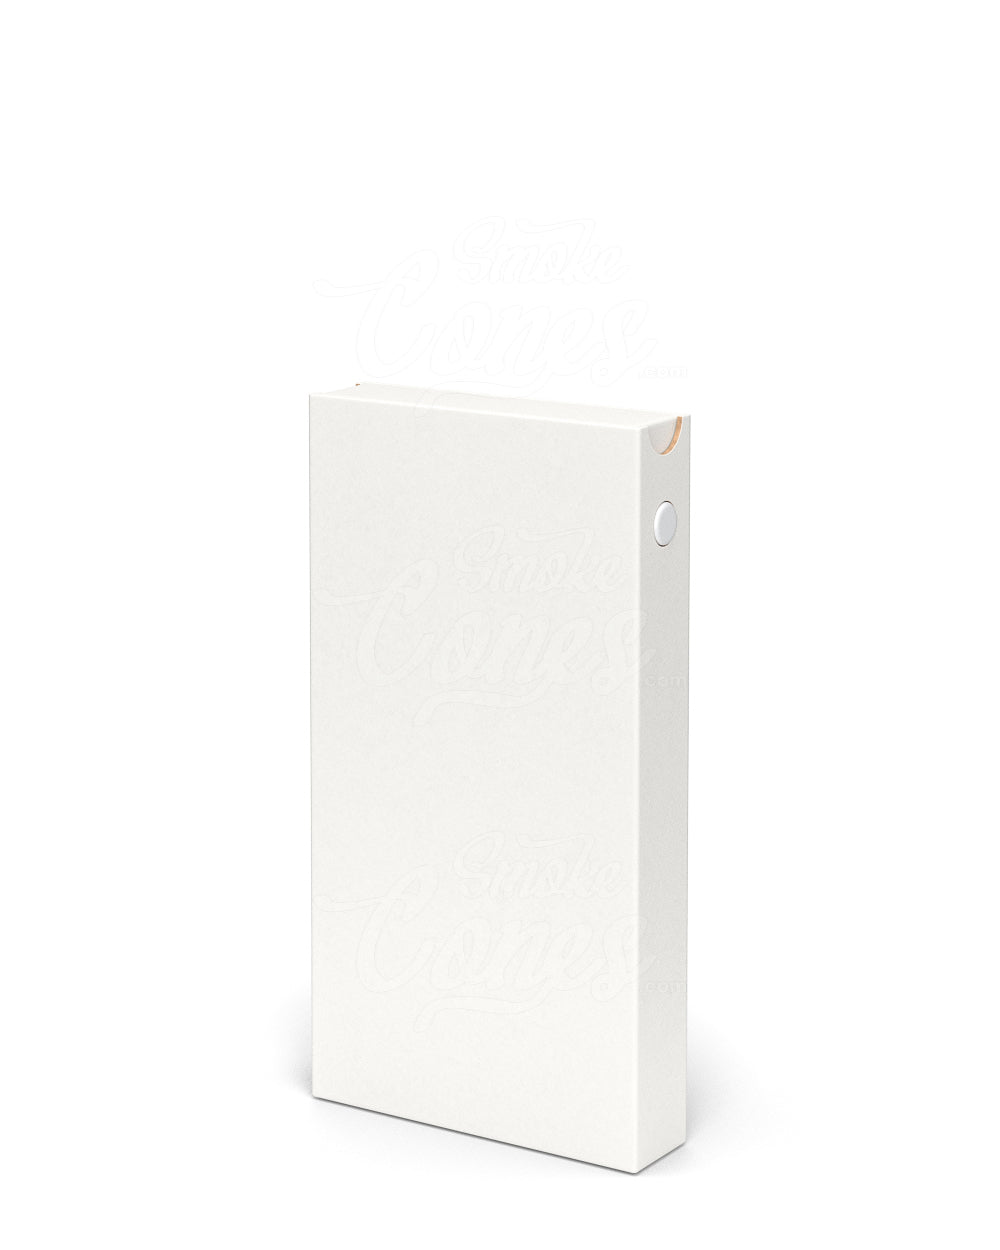 145mm Slim Recyclable White Cardboard Child Resistant Joint Container With Press Button 100/Box - 4